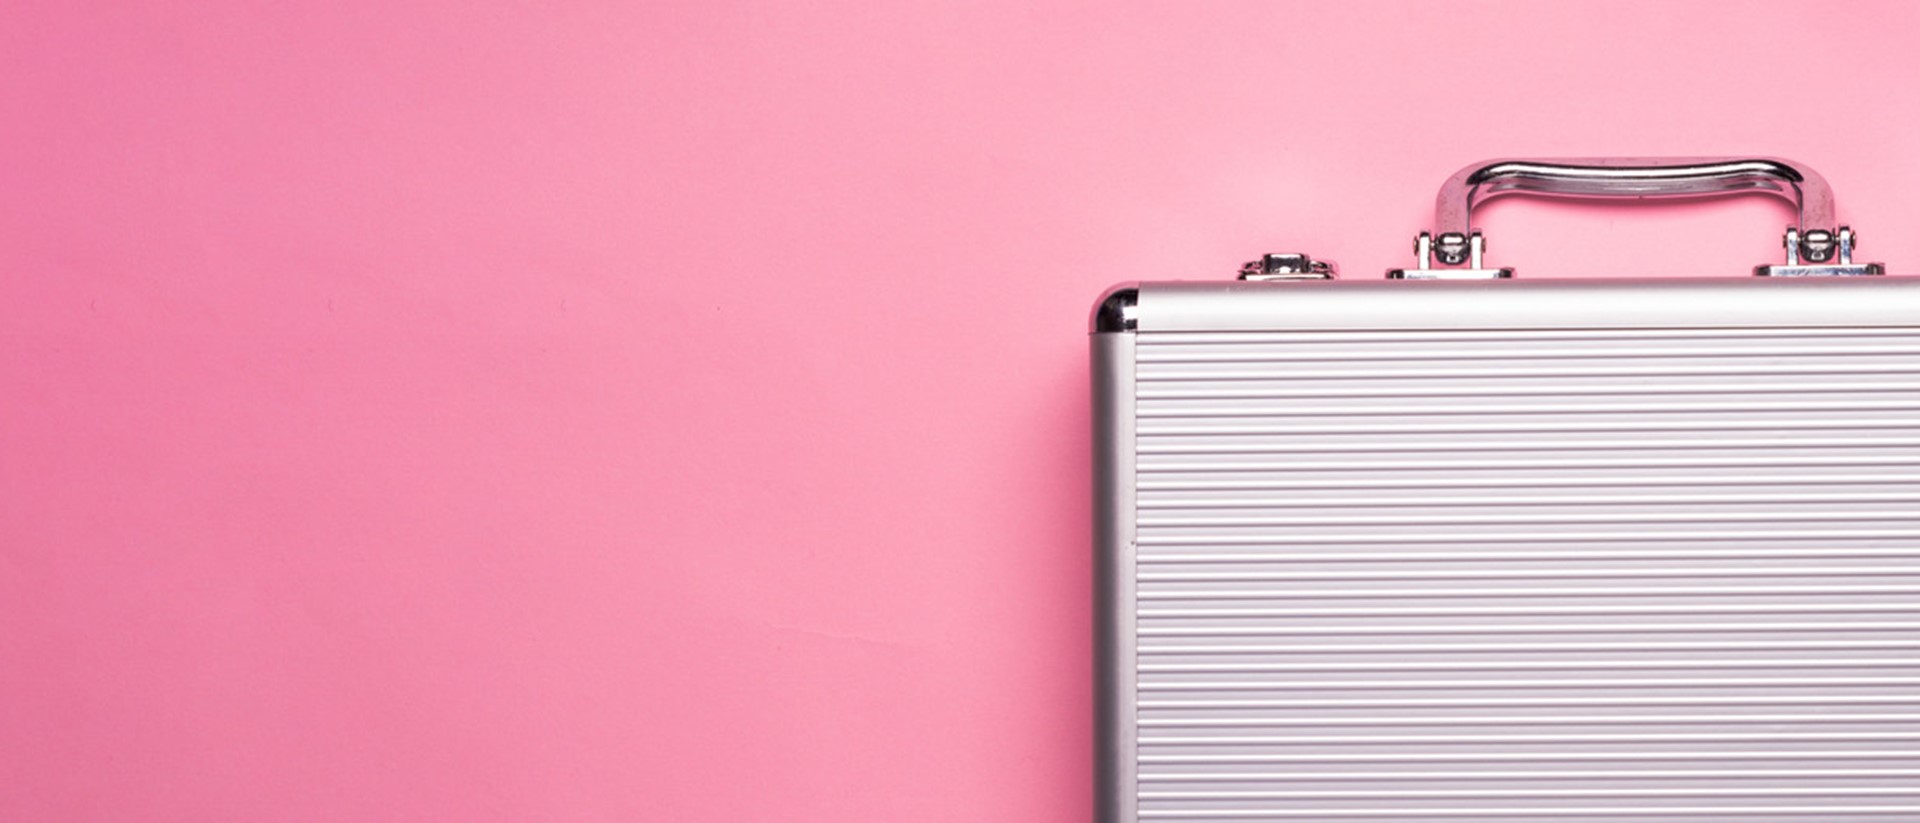 A silver briefcase against a pink background